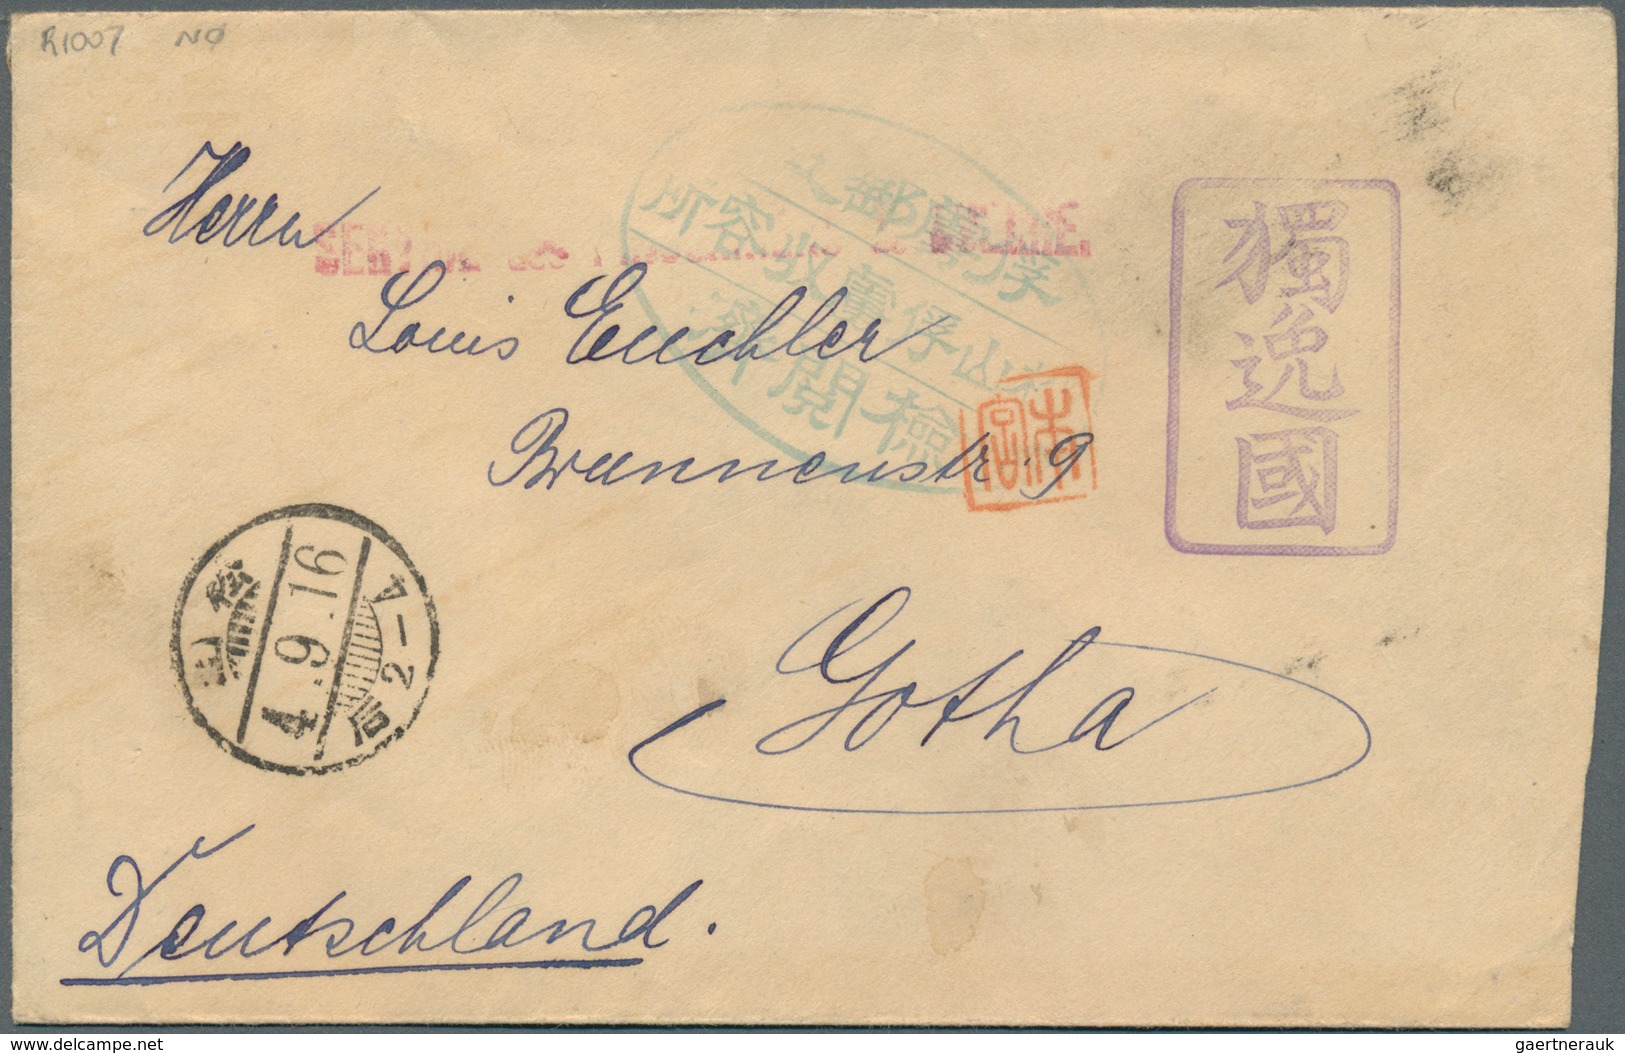 Lagerpost Tsingtau: Matsuyama, 1914/17, covers (4, one w. contents: acknowledgment of parcel), and m